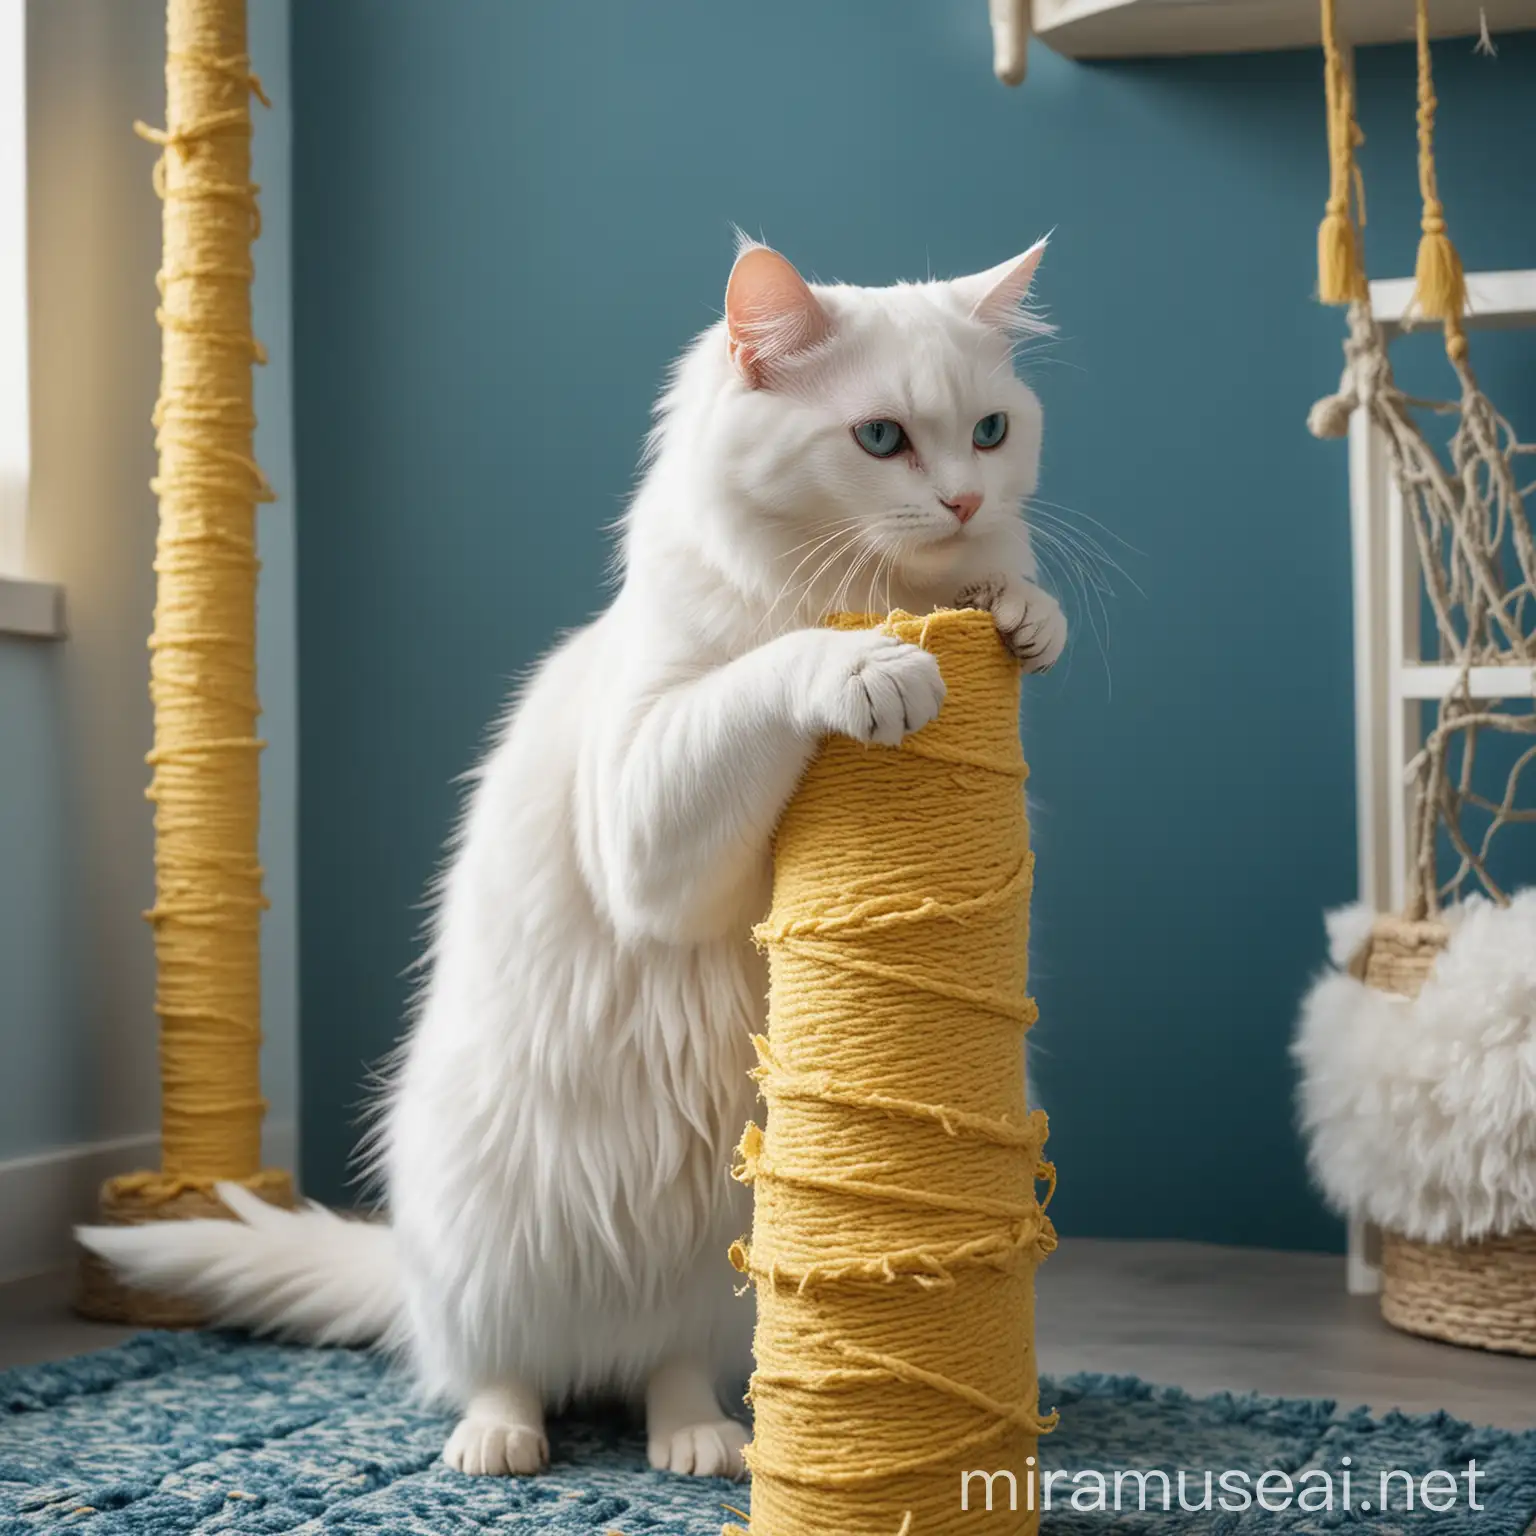 Fluffy White Cat Sharpening Claws on Yellow Scratching Post in Blue Room